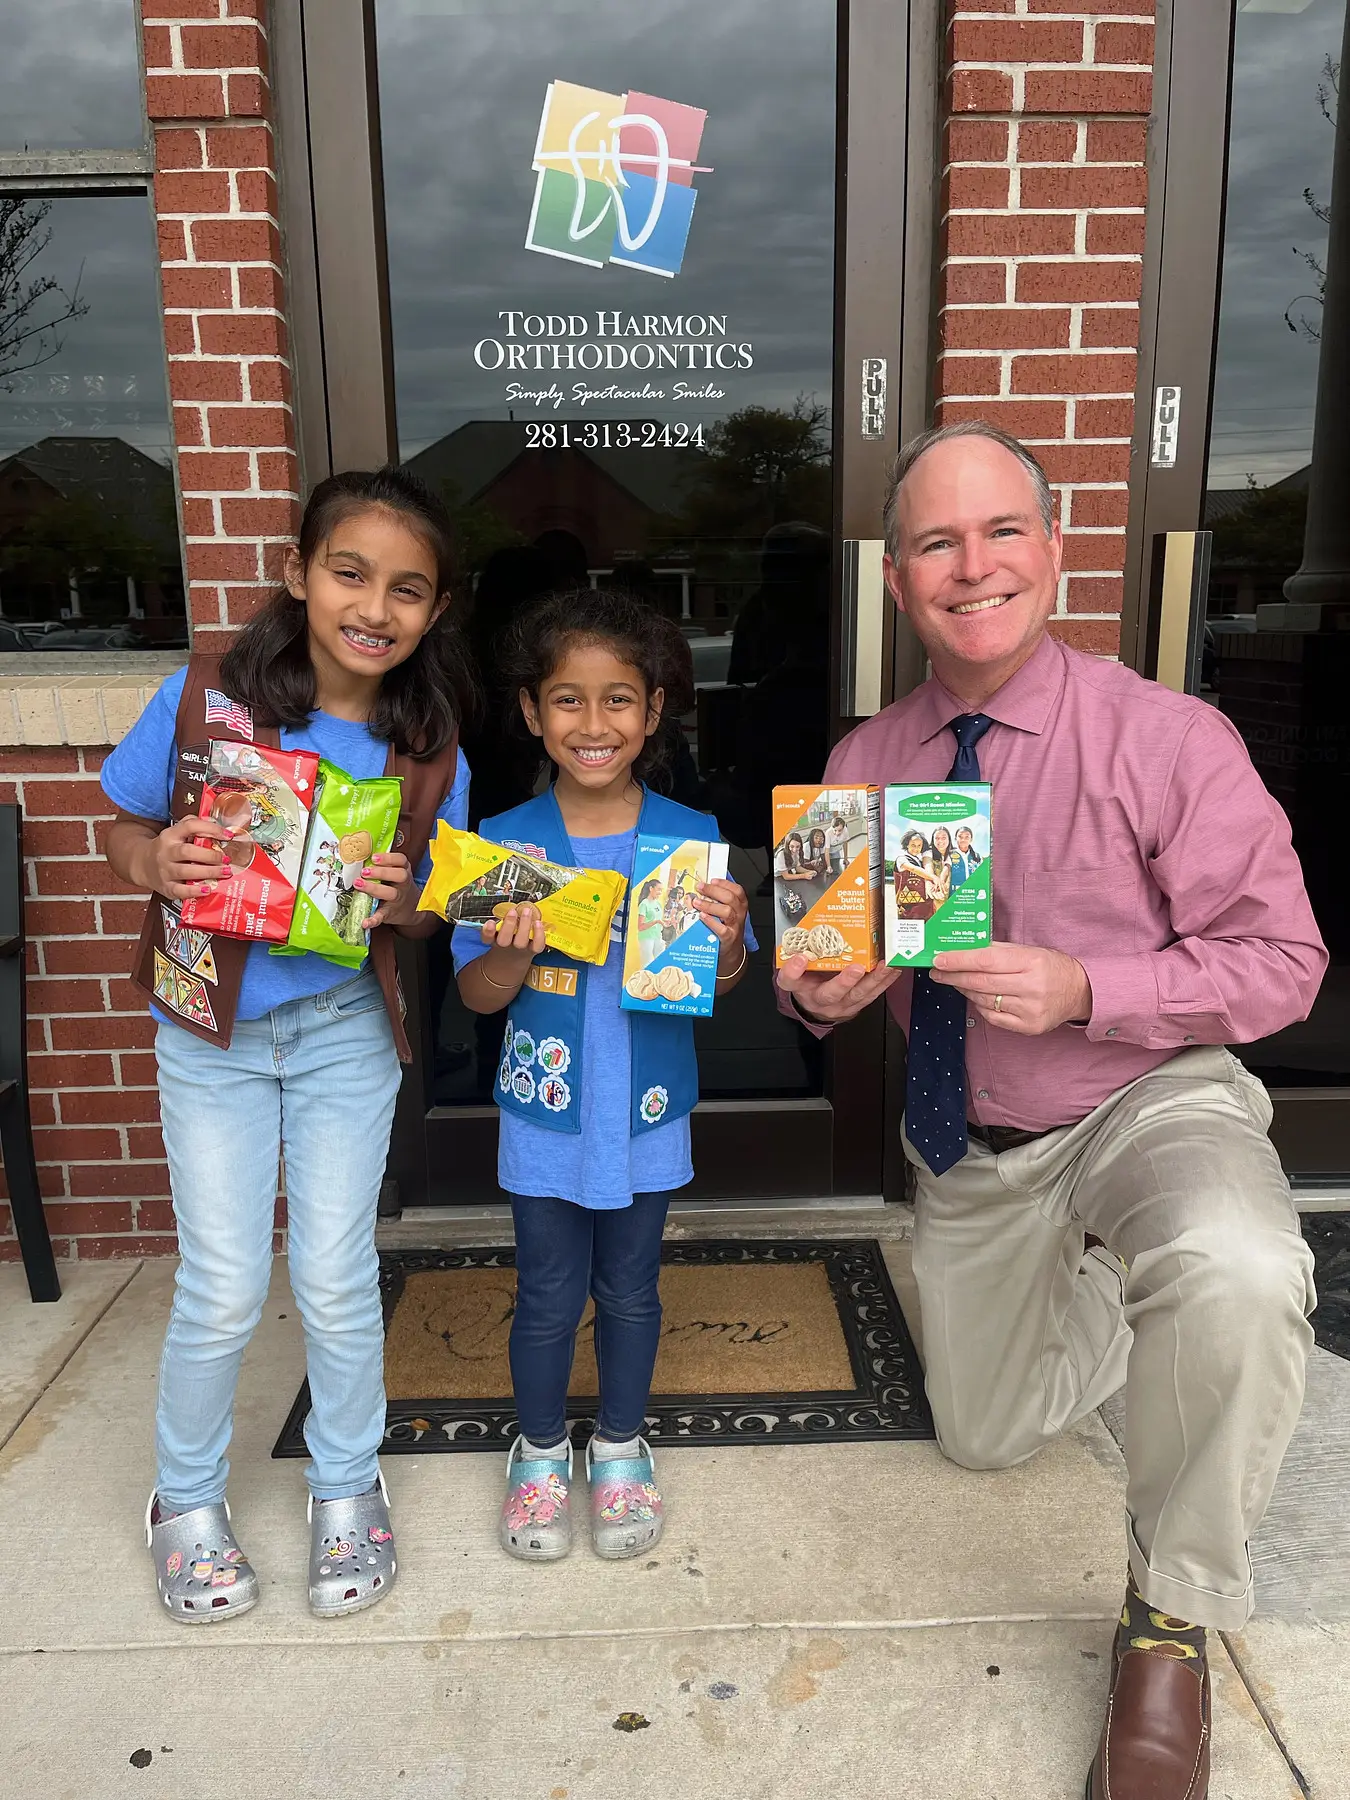 Dr. Harmon pictured with 2 girl scouts and a selection of girl scout cookies